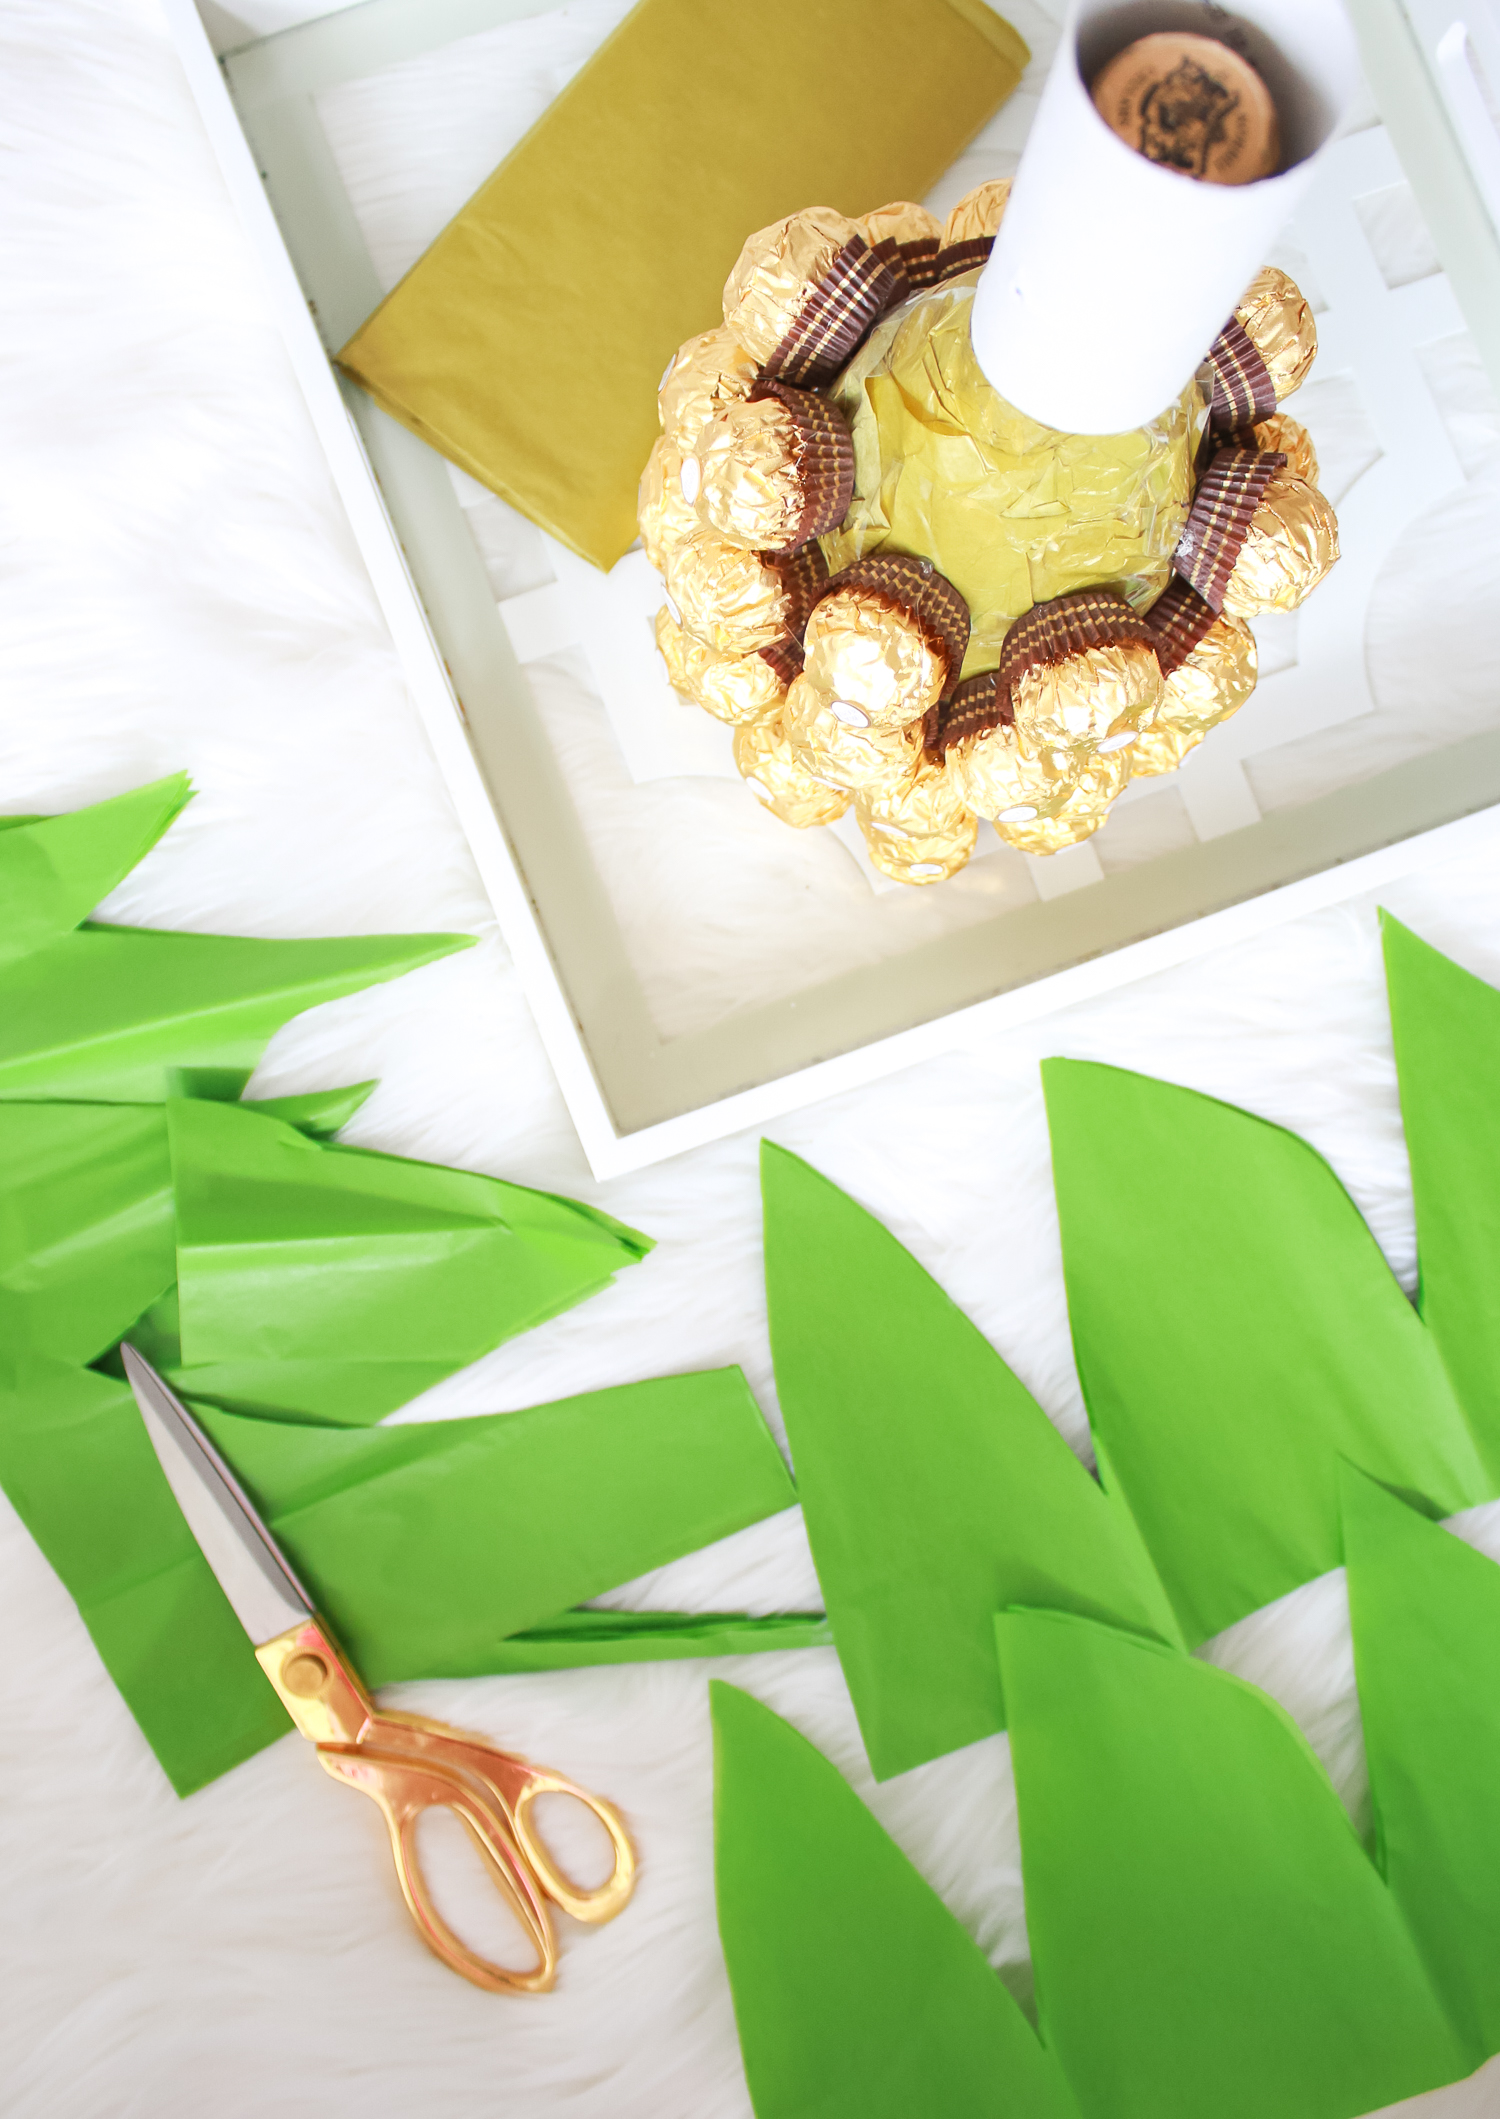 Looking for DIY housewarming gifts? Look no further than this adorable chocolate-covered champagne pineapple by southern blogger Stephanie Ziajka from Diary of a Debutante